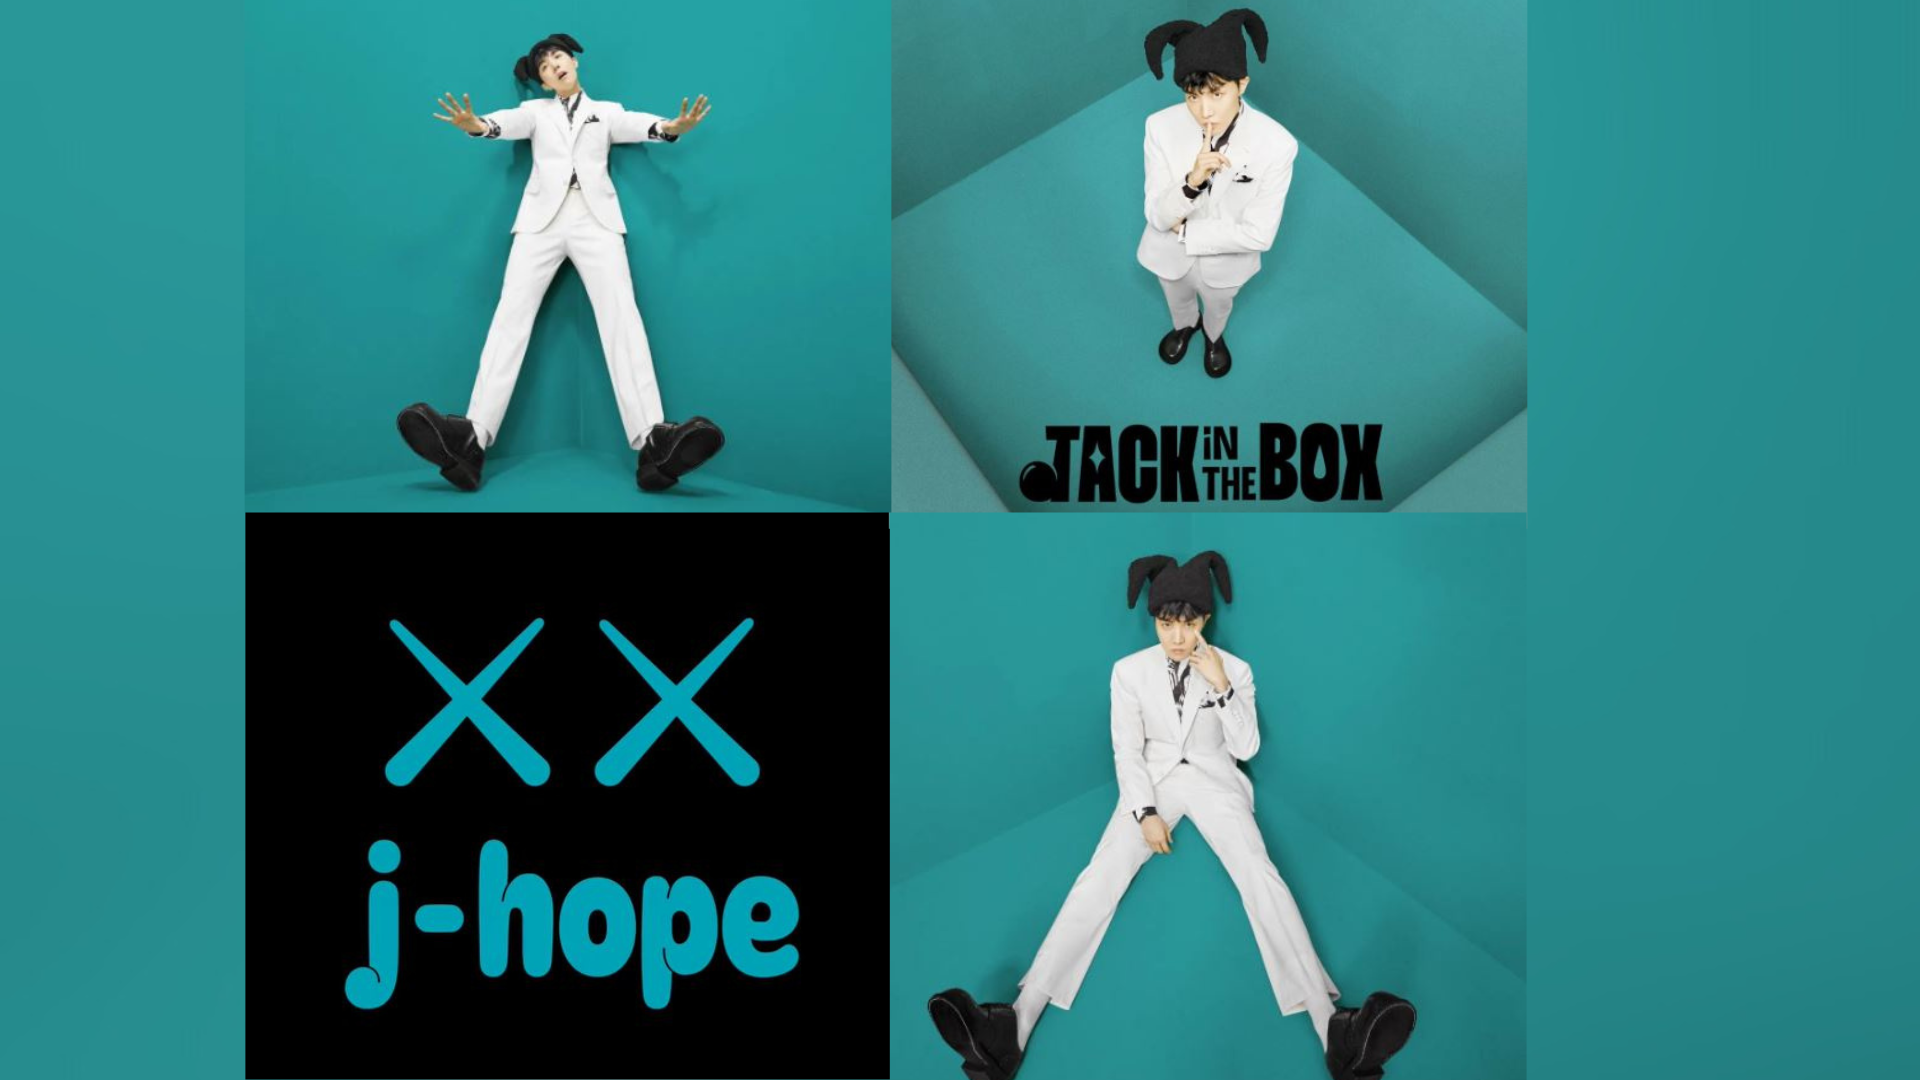 BTS J-Hope's 'Jack In The Box' sells nearly 520,000 copies to debut at No.  1 on daily chart